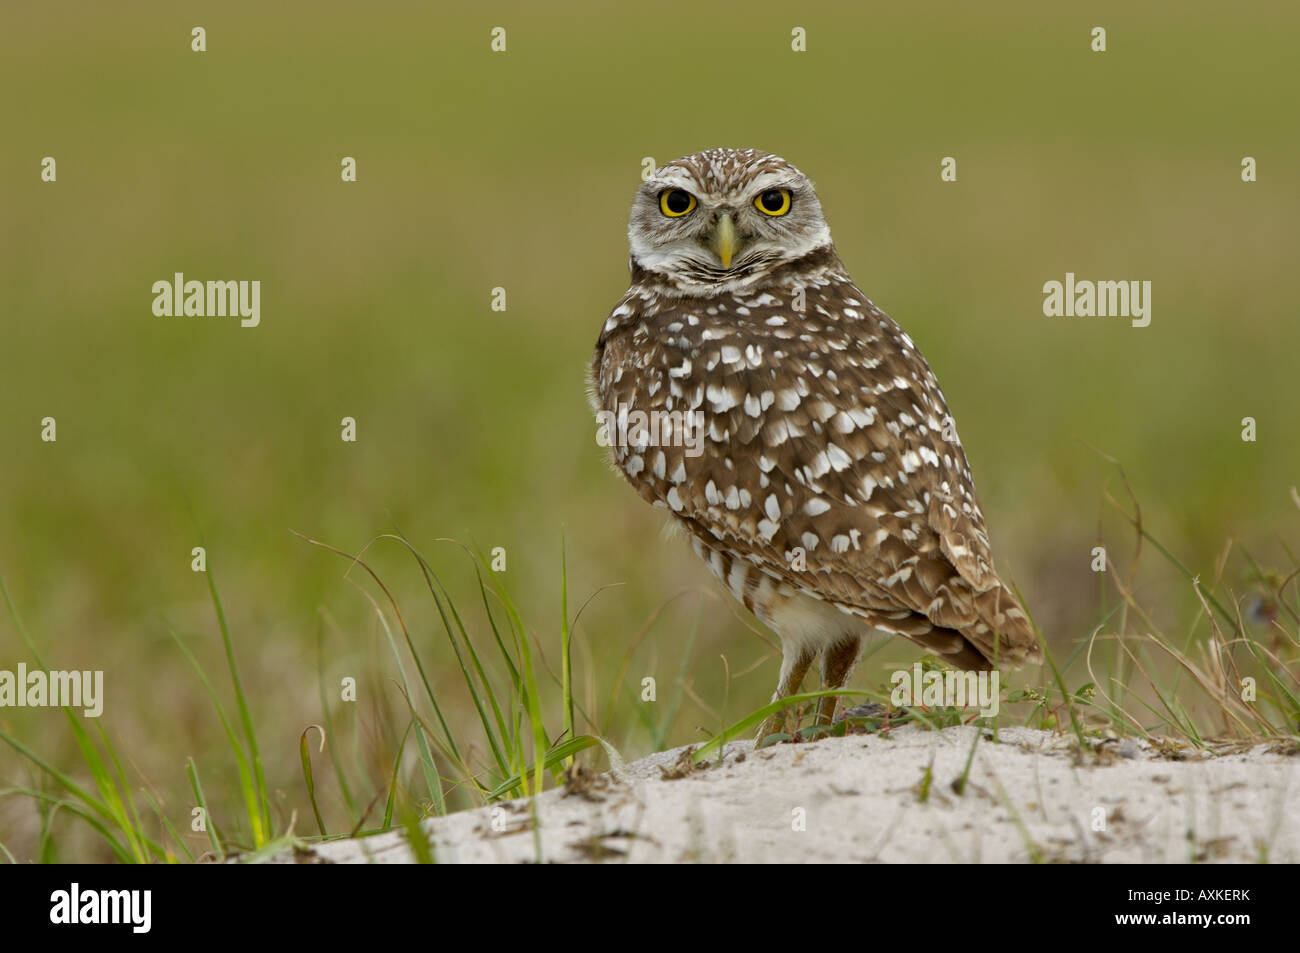 Burrowing Owl Speotyto cunicularia Florida USA standing on ground Stock Photo